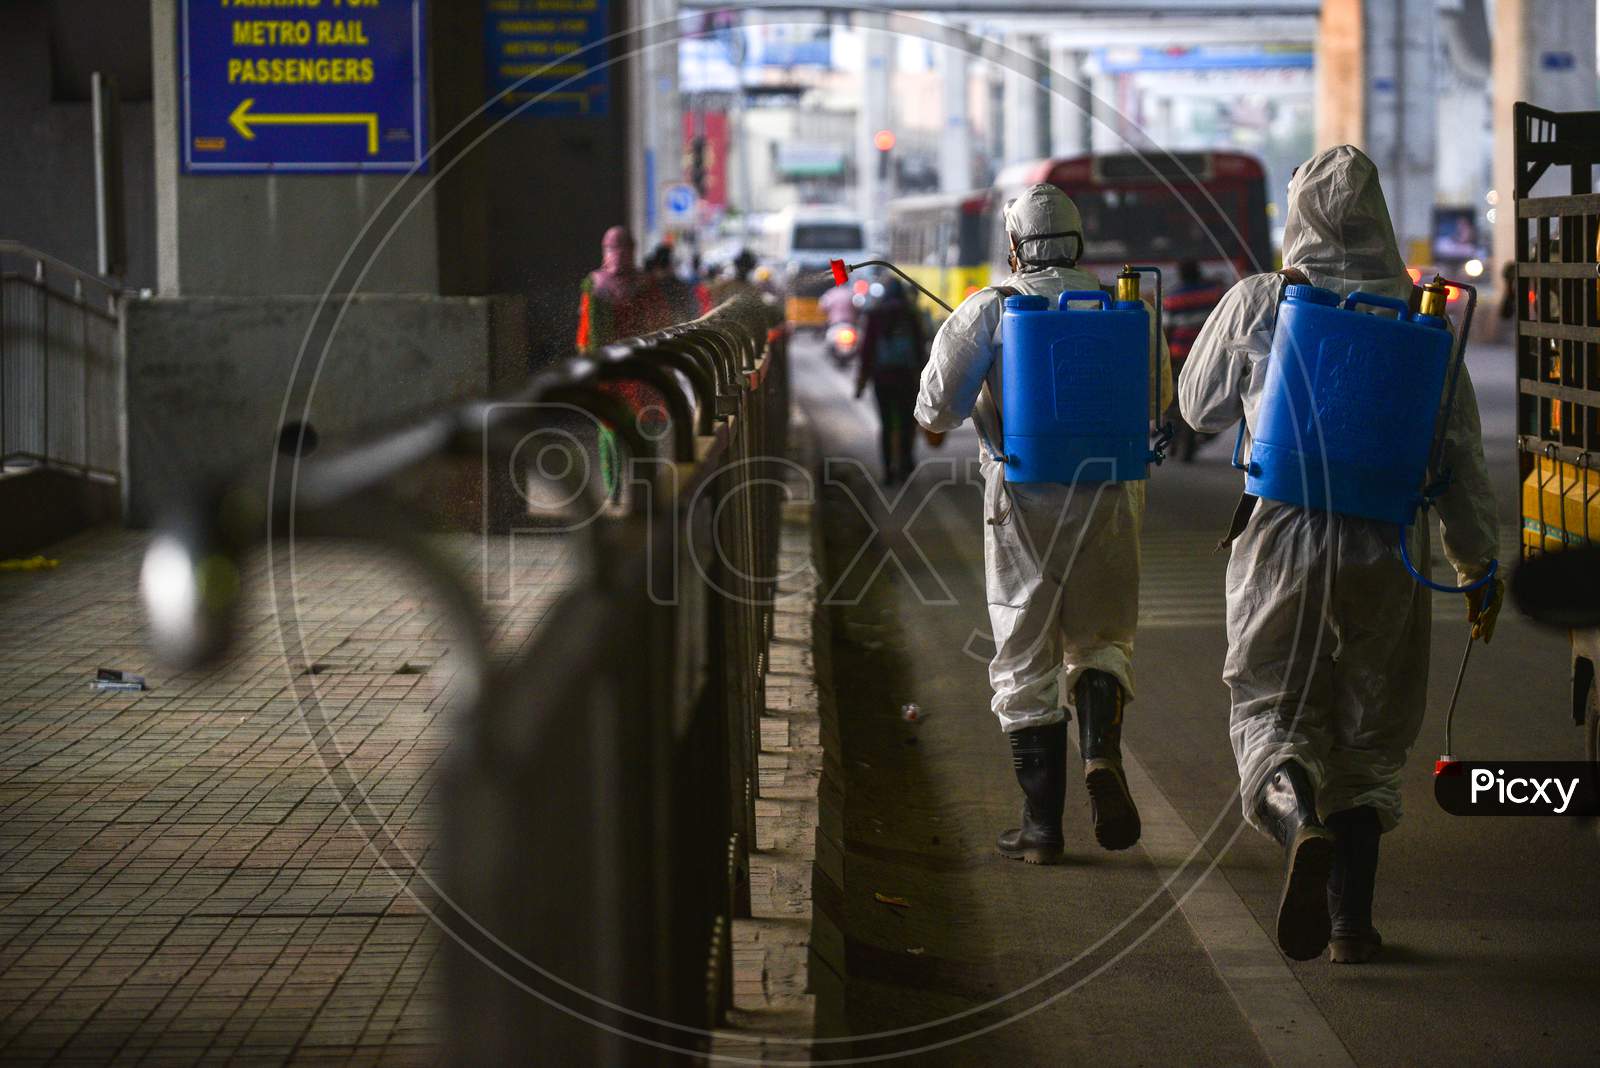 Disaster Response Force(DRF) team with full body suits spraying Disinfectant Solution across the Hyderabad City to reduce the spread of the COVID-19 Virus or Coronavirus at Ameerpet Metro Station